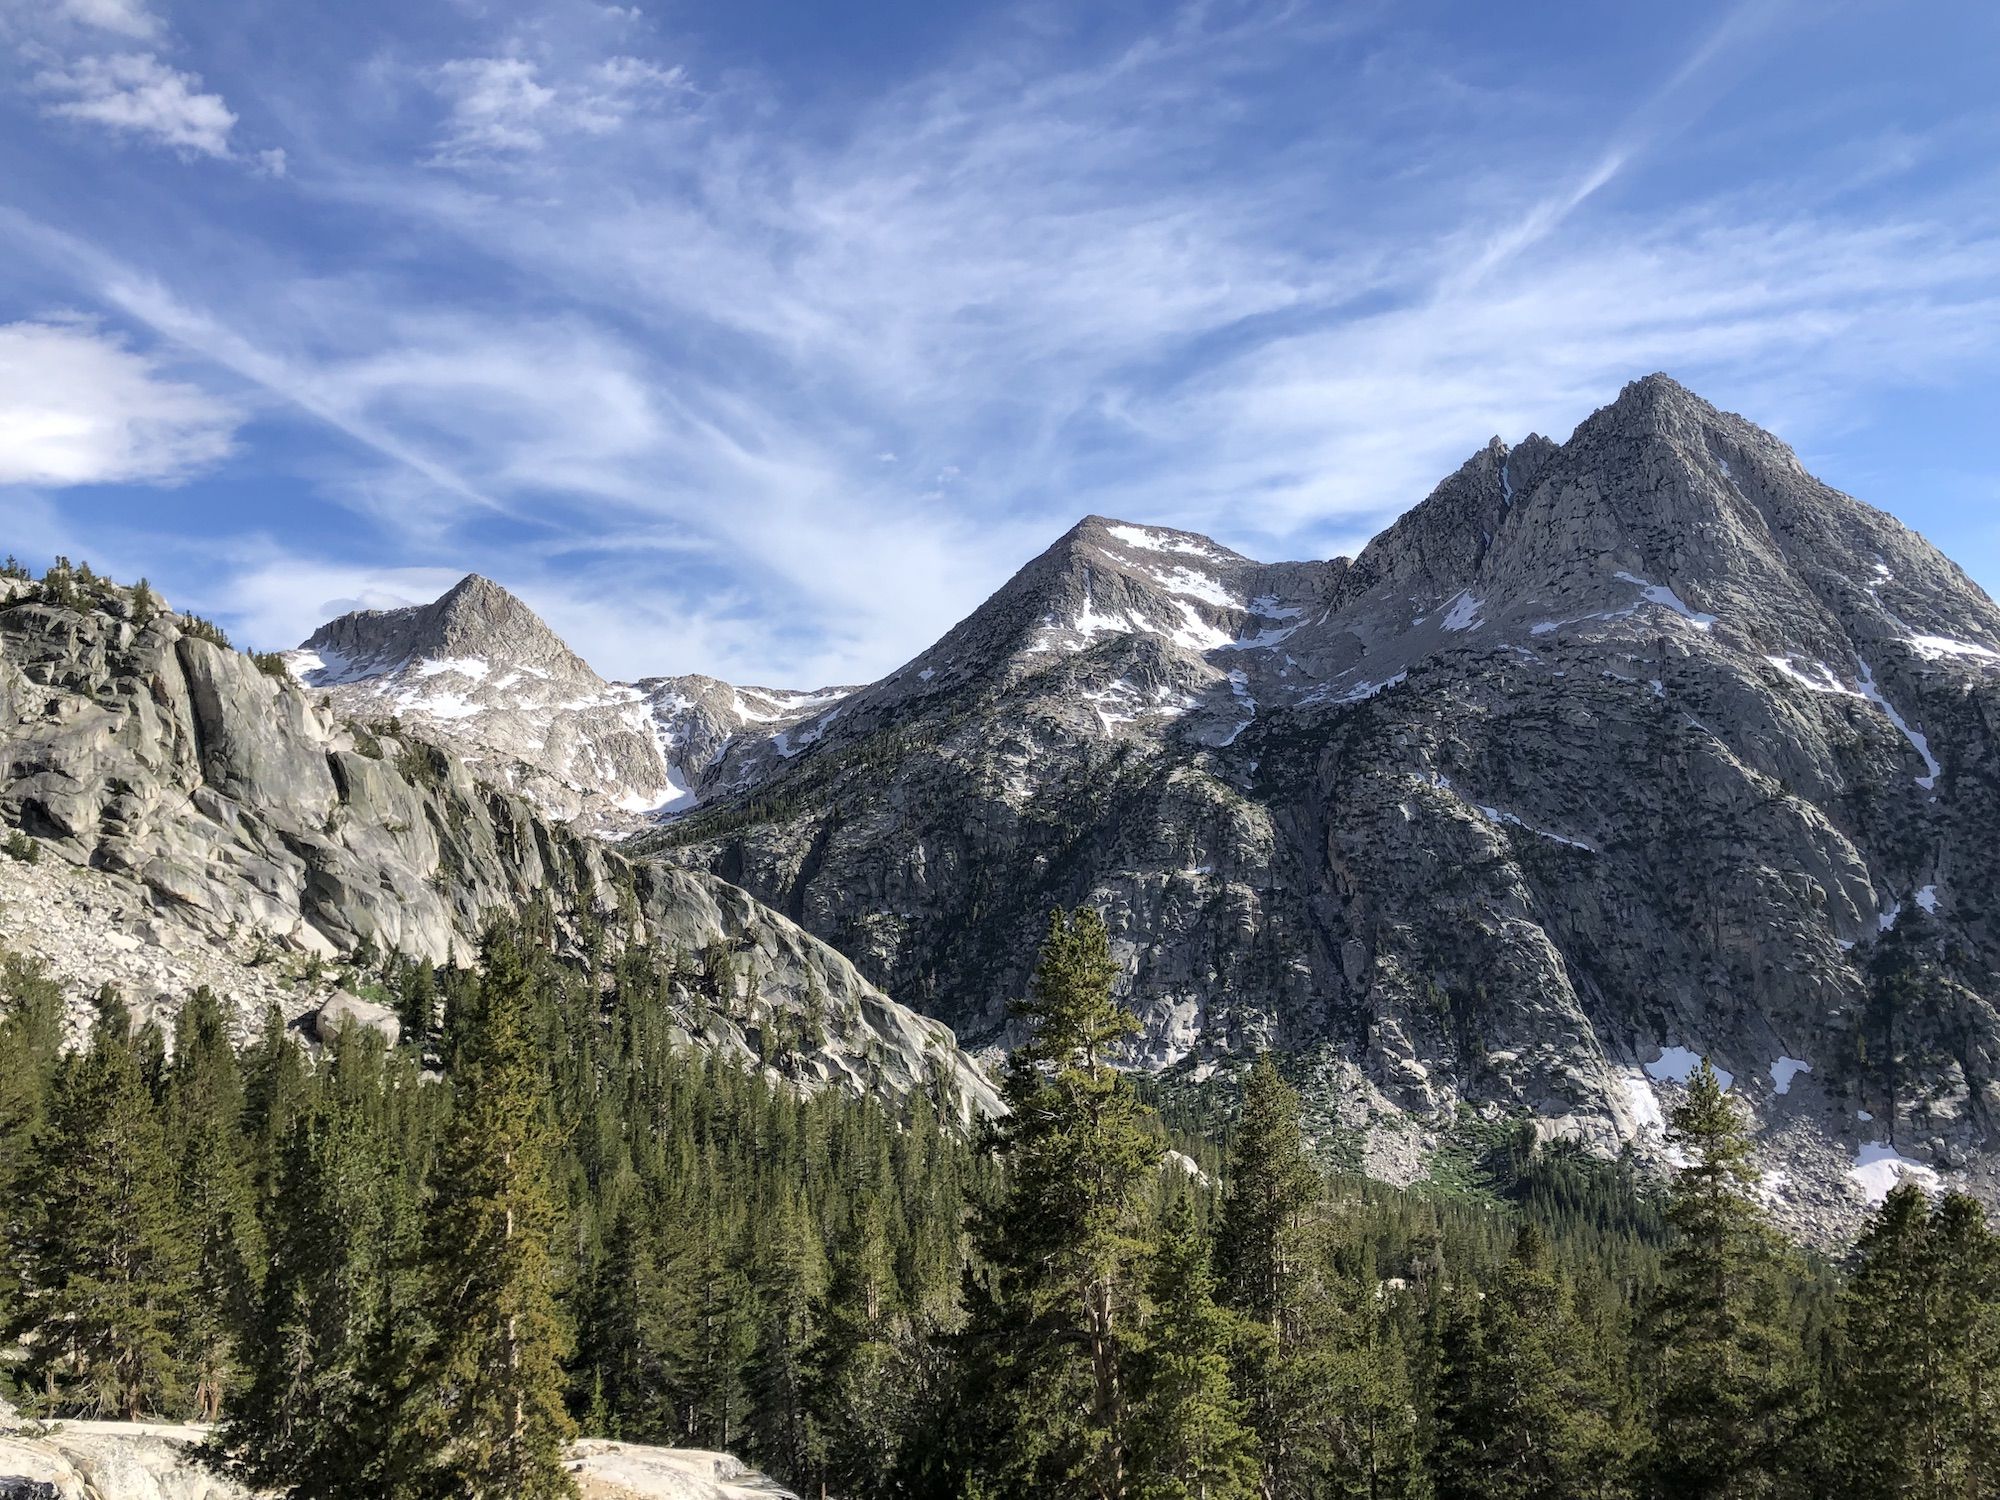 A mountain landscape with trees below and bare granite mountain sides above